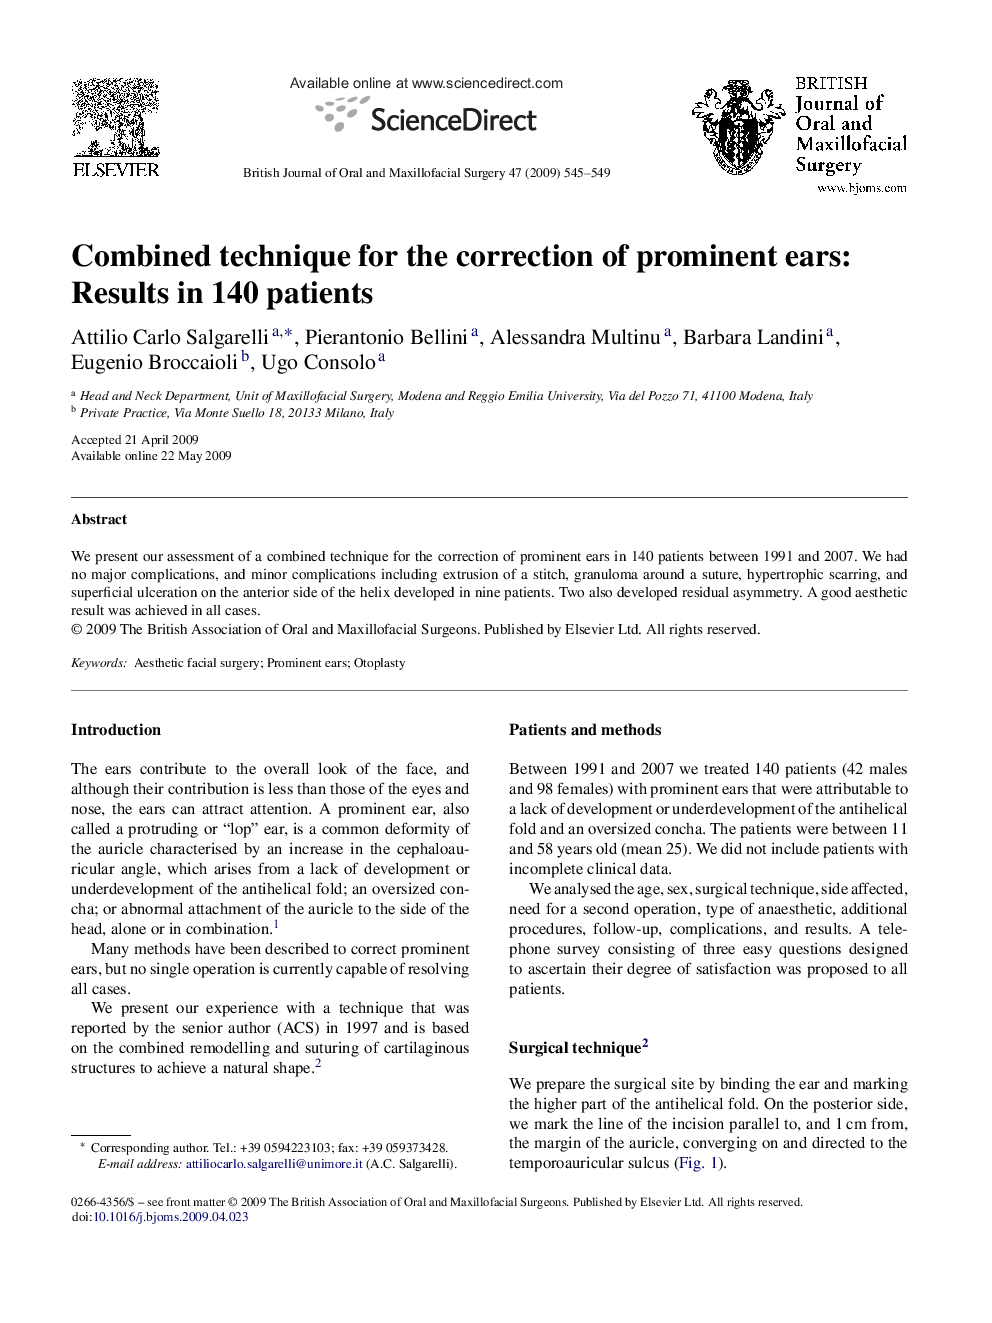 Combined technique for the correction of prominent ears: Results in 140 patients